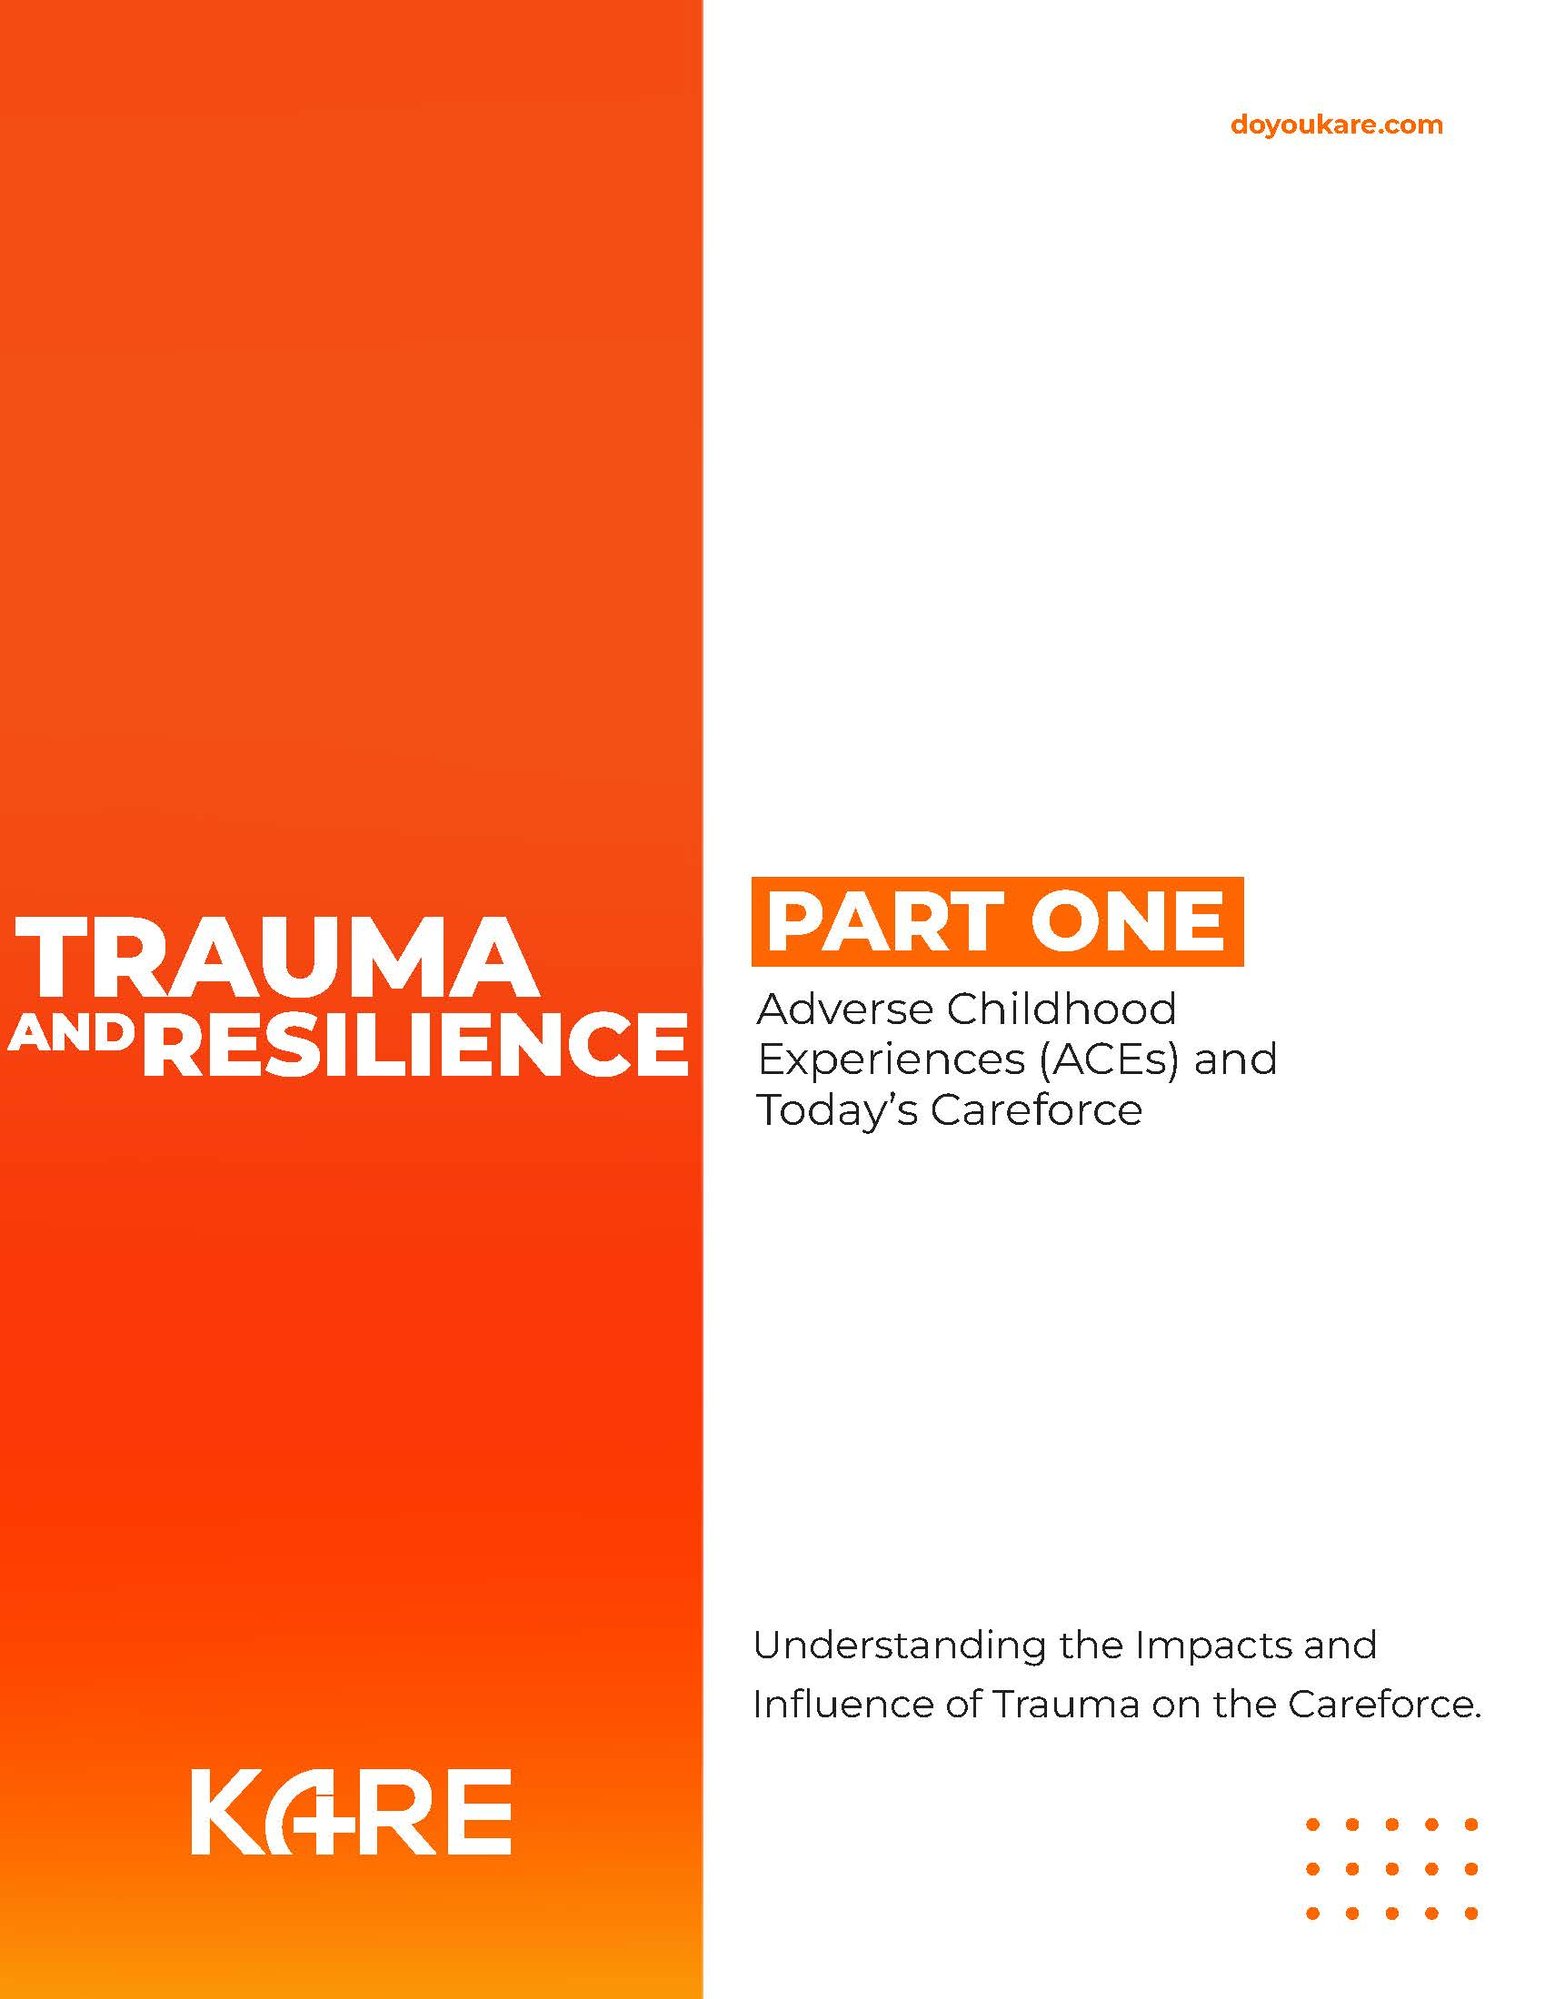 KARE Trauma and Resilience (PART ONE) COVER_Page_01